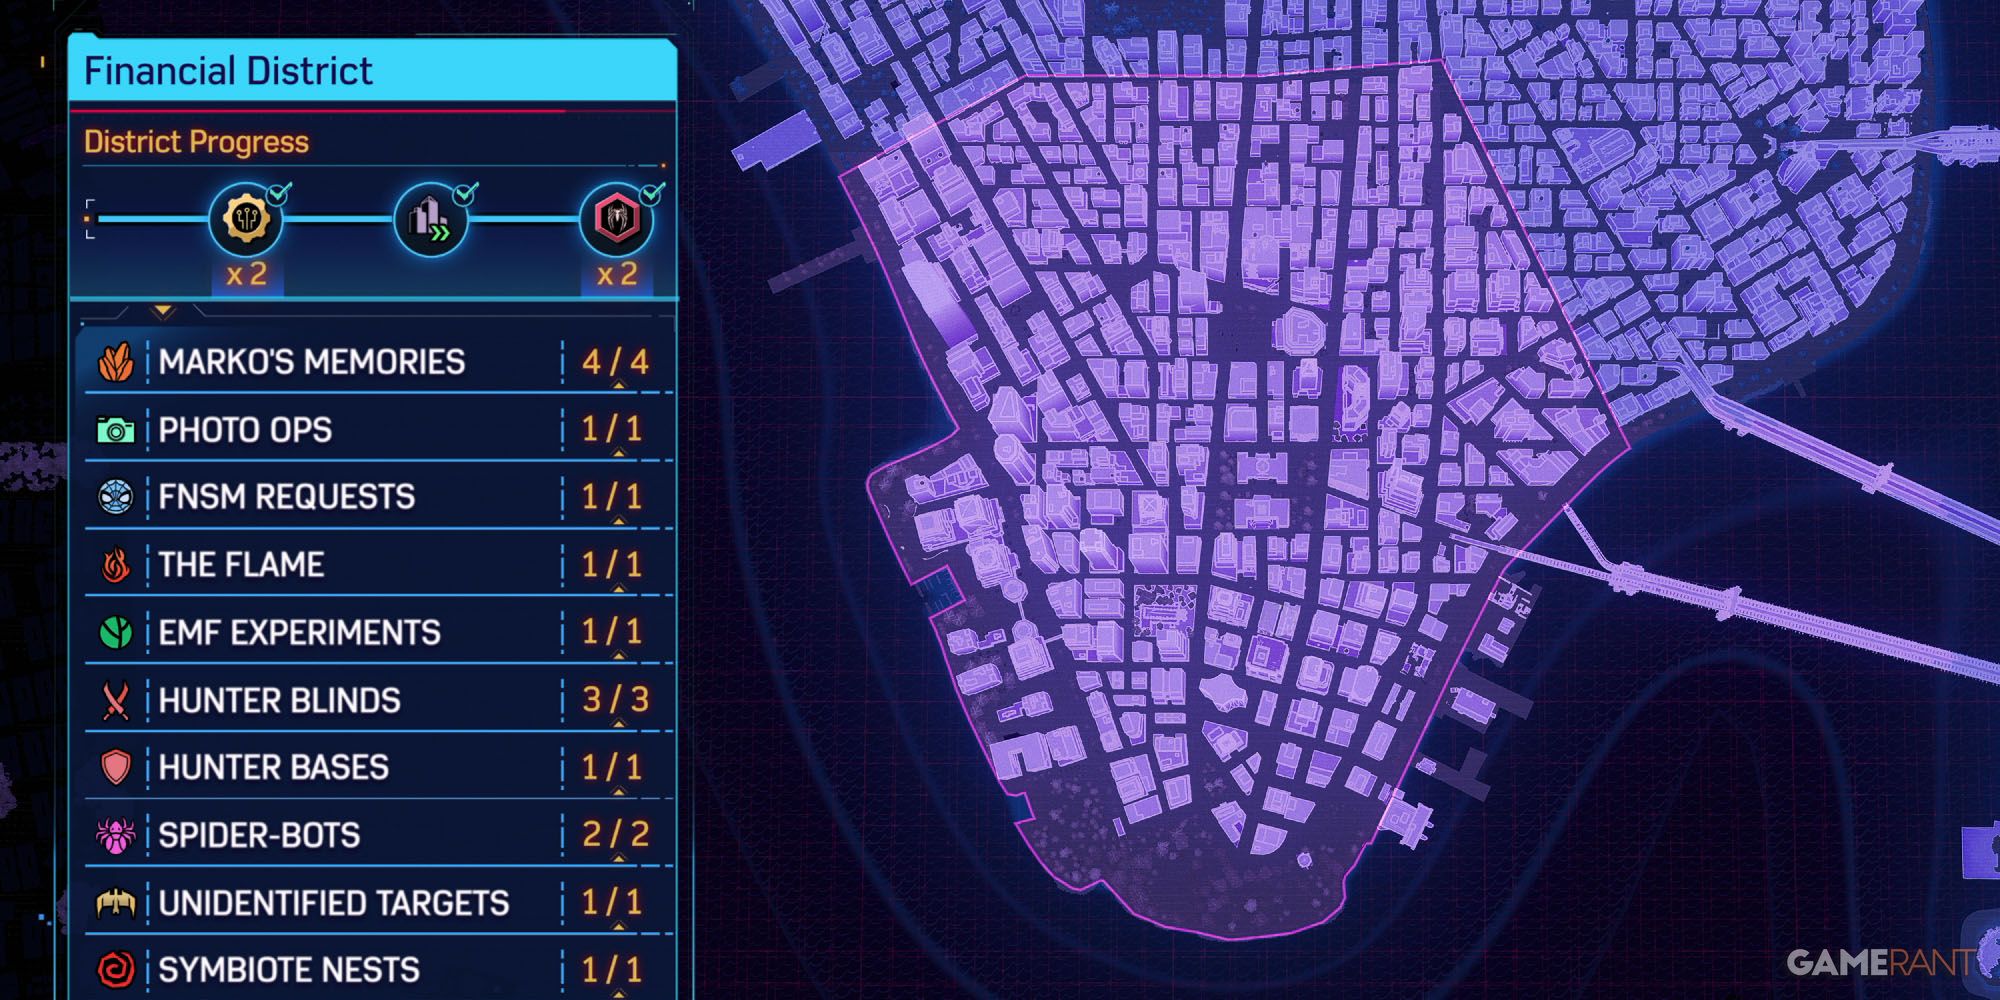 Full monetary district map (100% completion information)